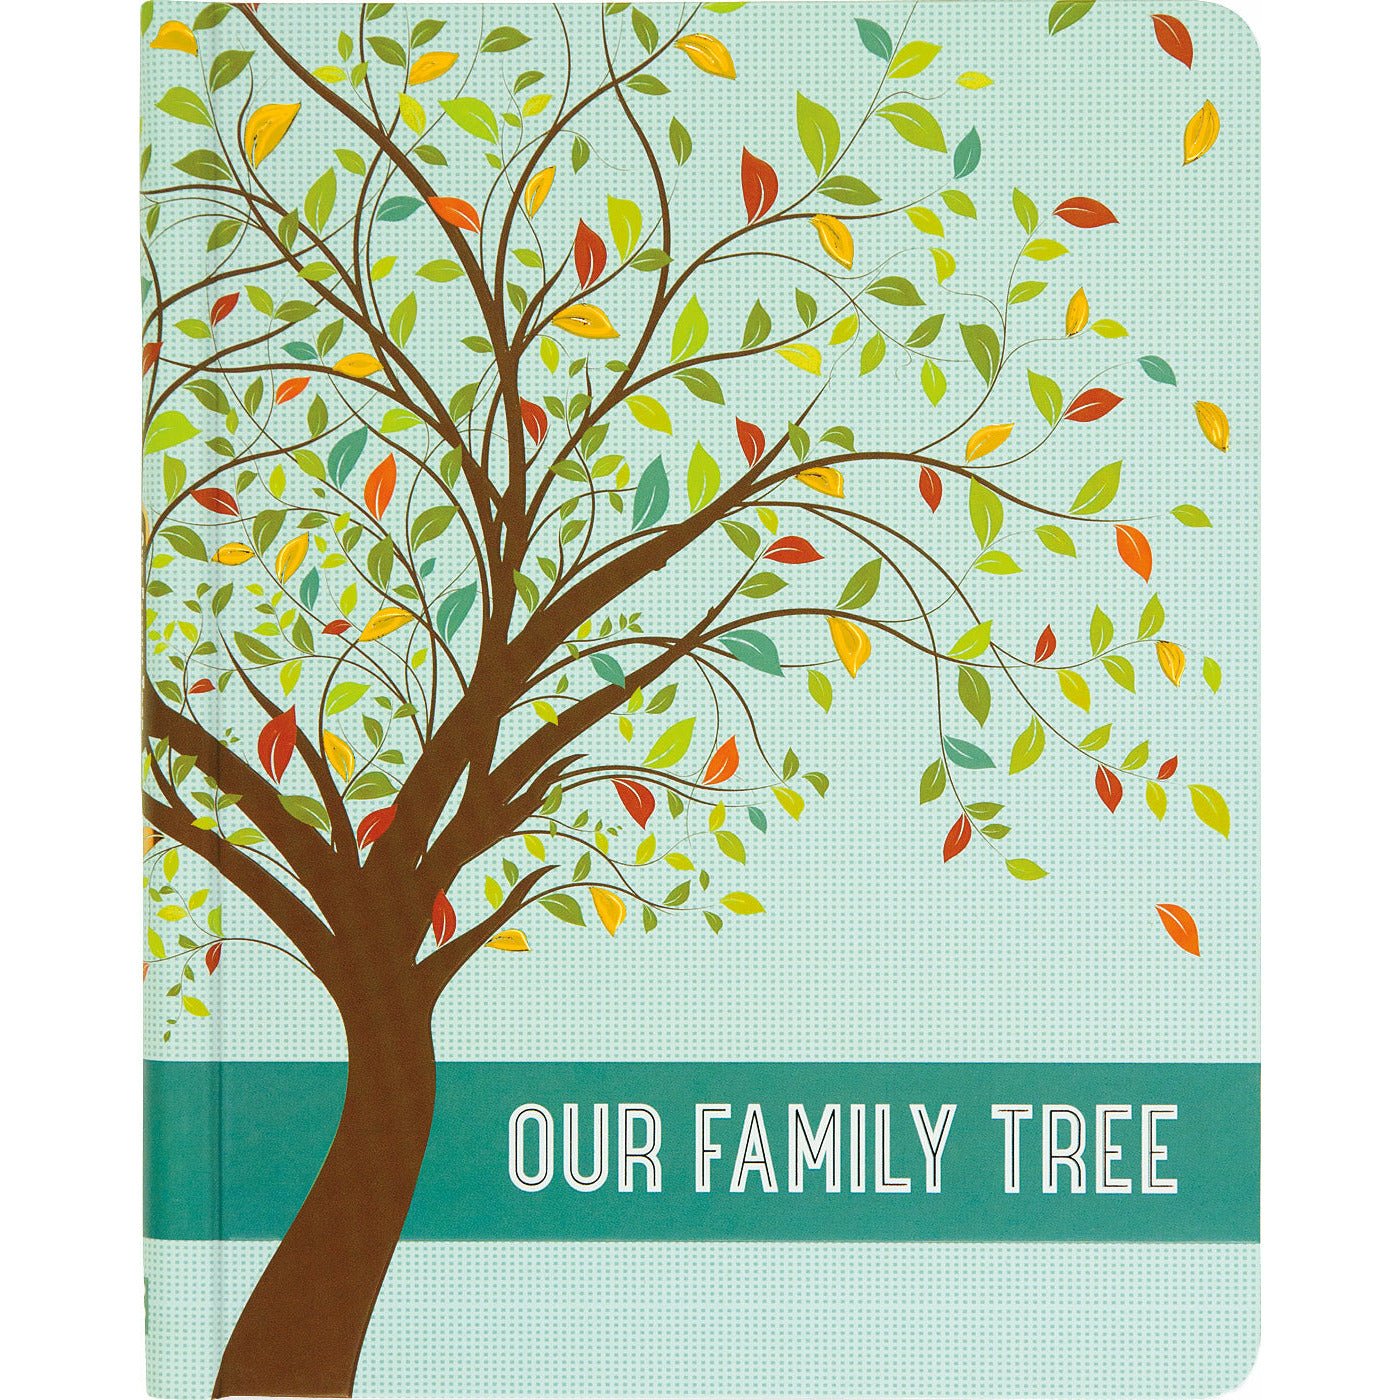 Our Family Tree - Hardcover Book